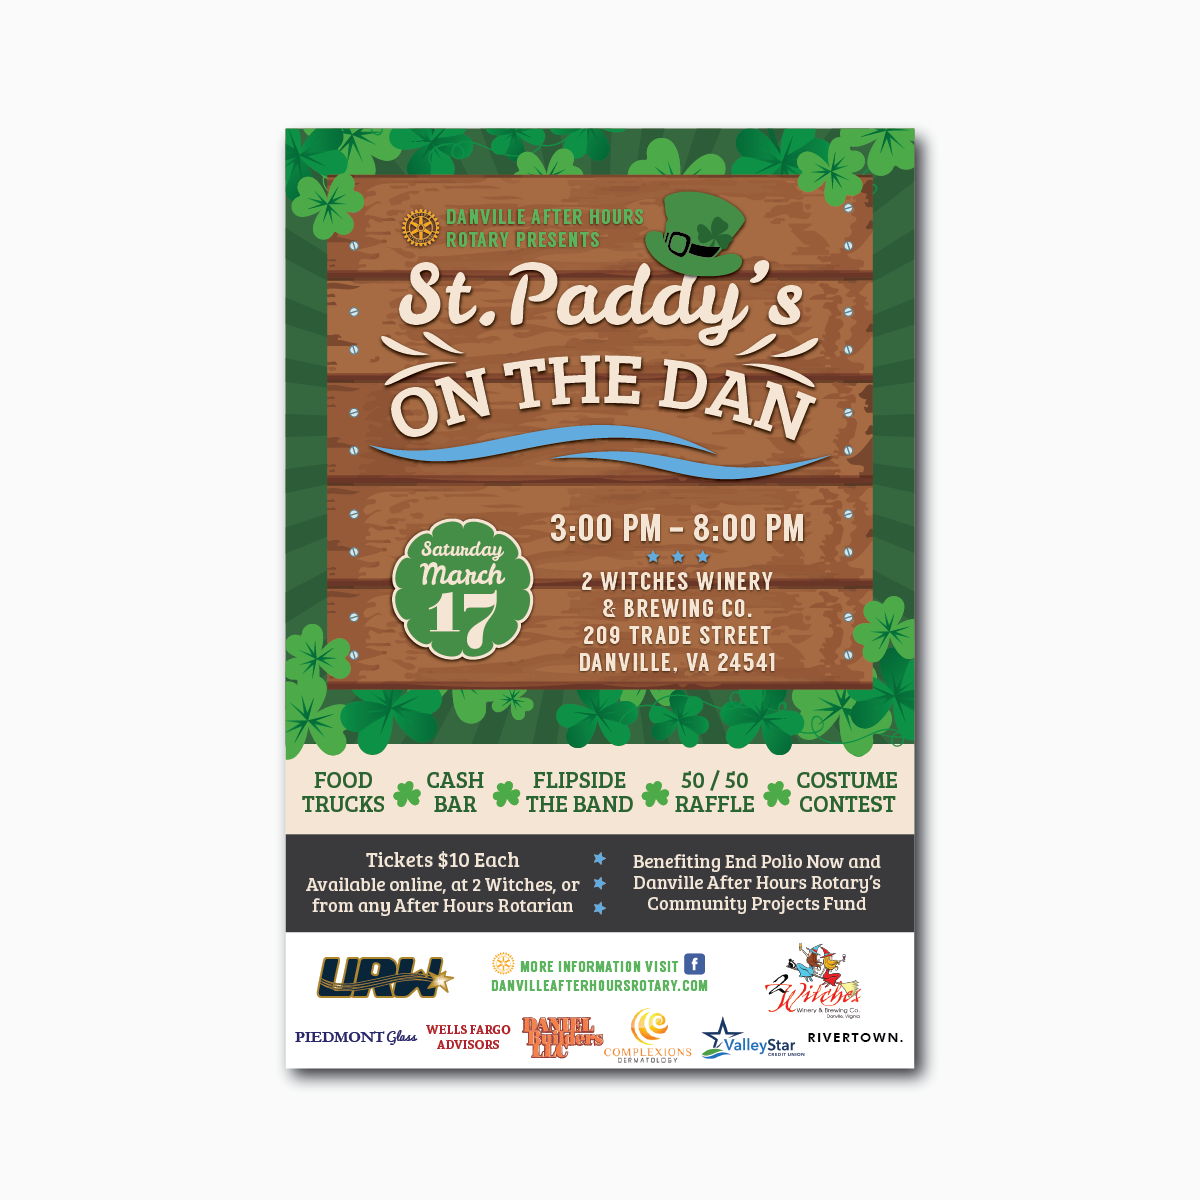 St. Paddys on the Dan 2018.png